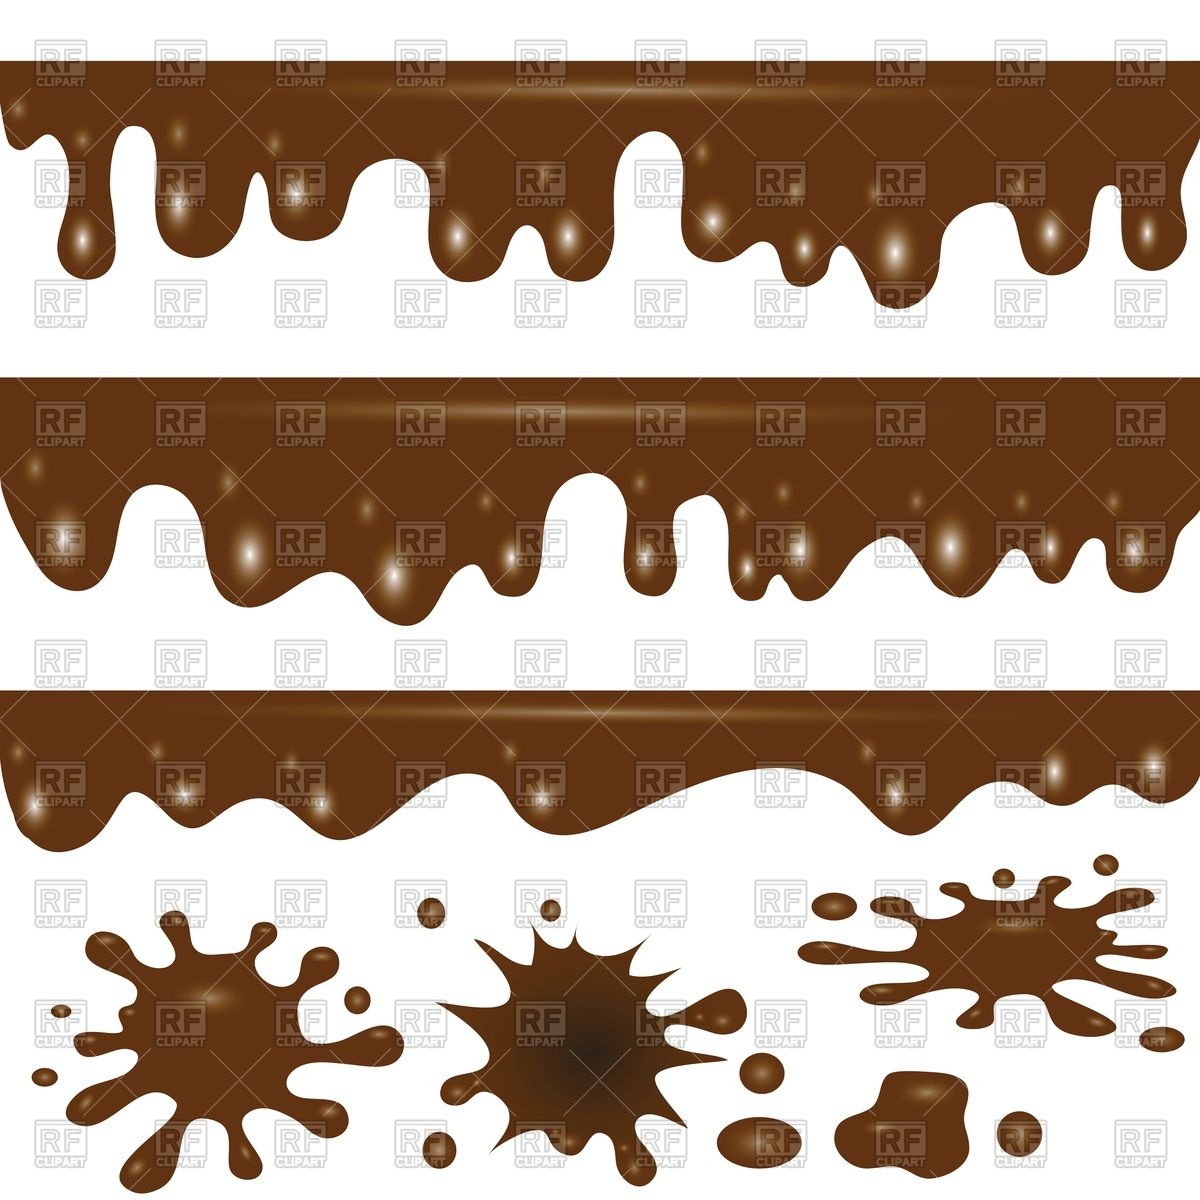 Of Melted Chocolate 42694 Download Royalty Free Vector Clipart  Eps